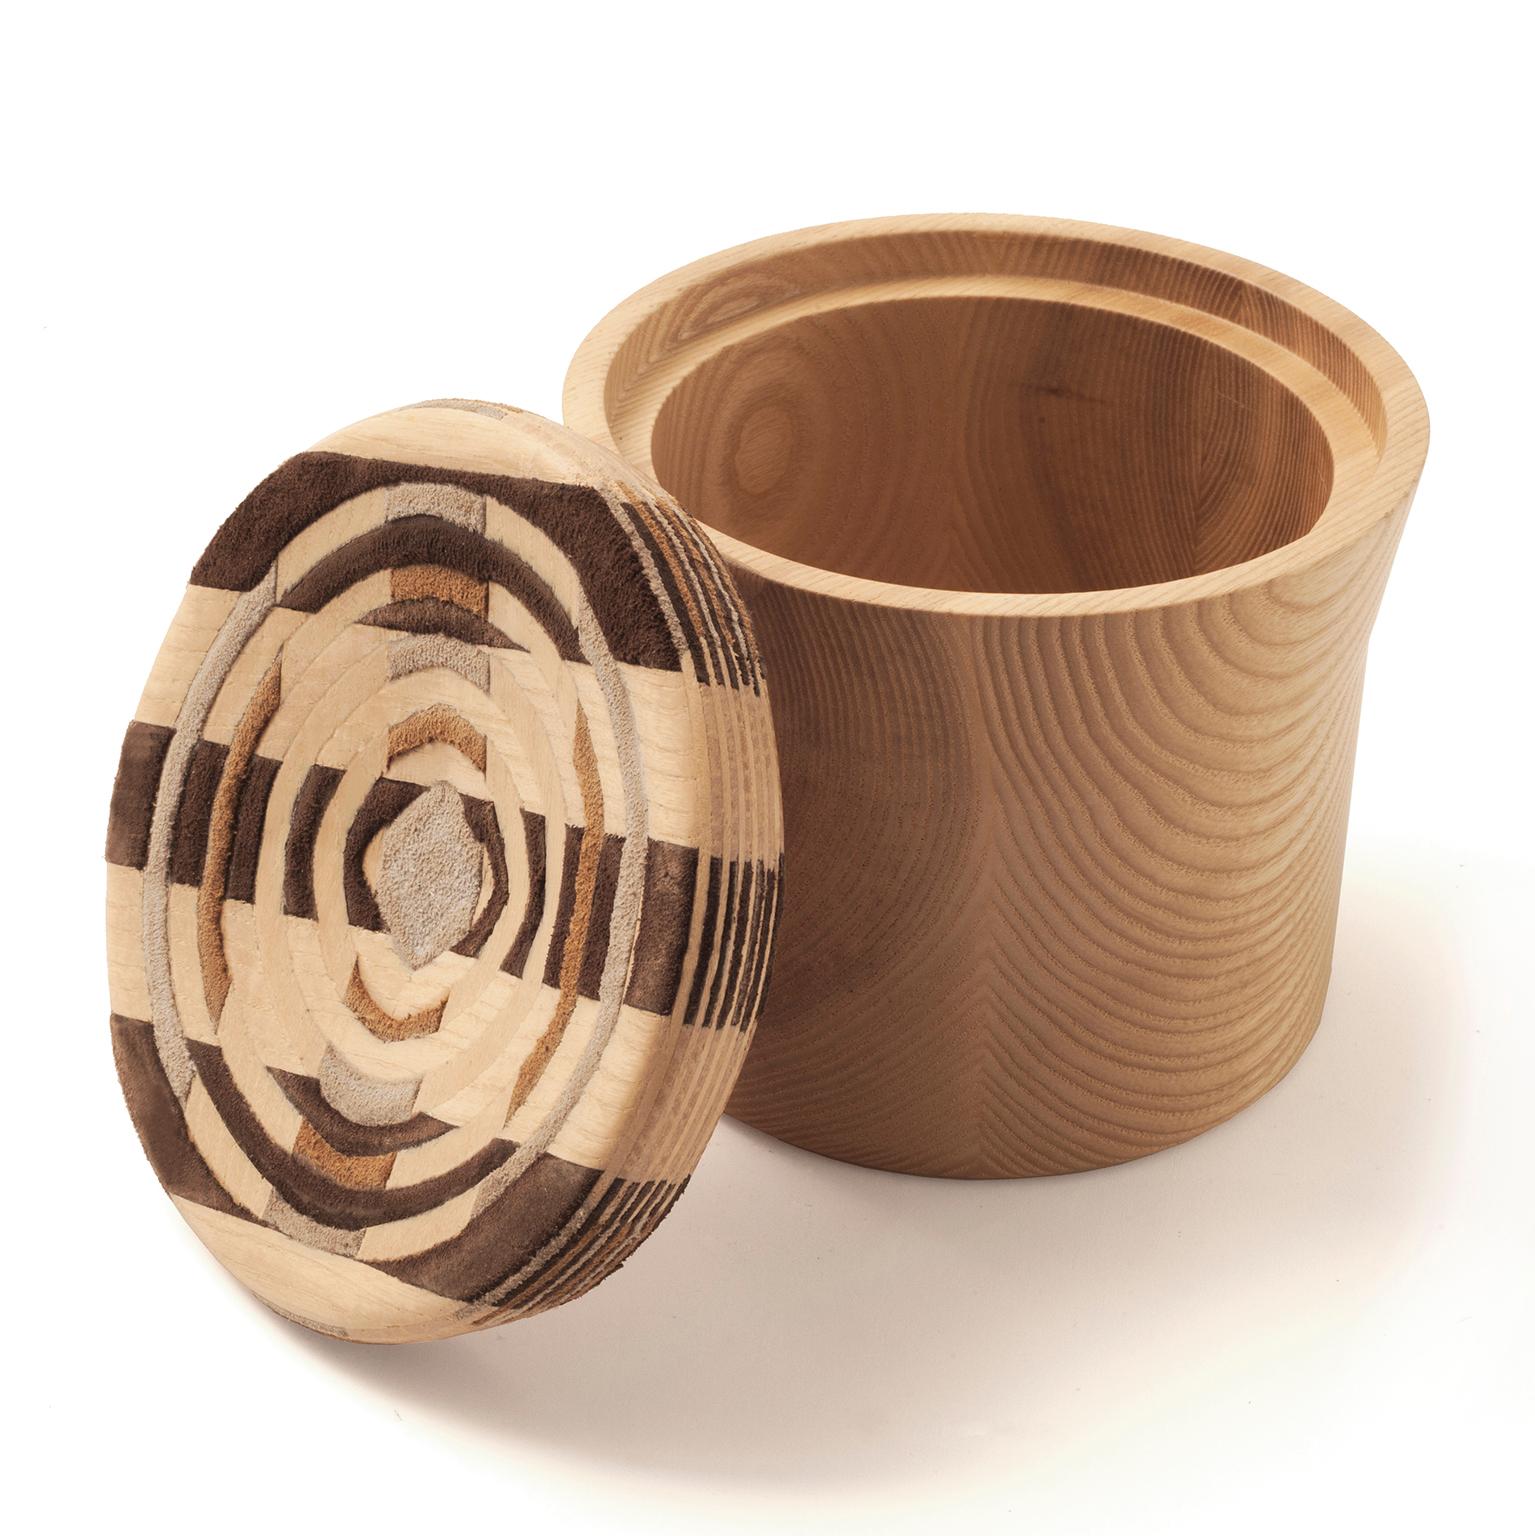 Solid wooden boxes with a unique lid, intricately made out of layers of thick veneer and fine leather pieces. The layers are carefully assembled and glued together in a warp and woof manner to create a thick block, which is then simulated in 3D